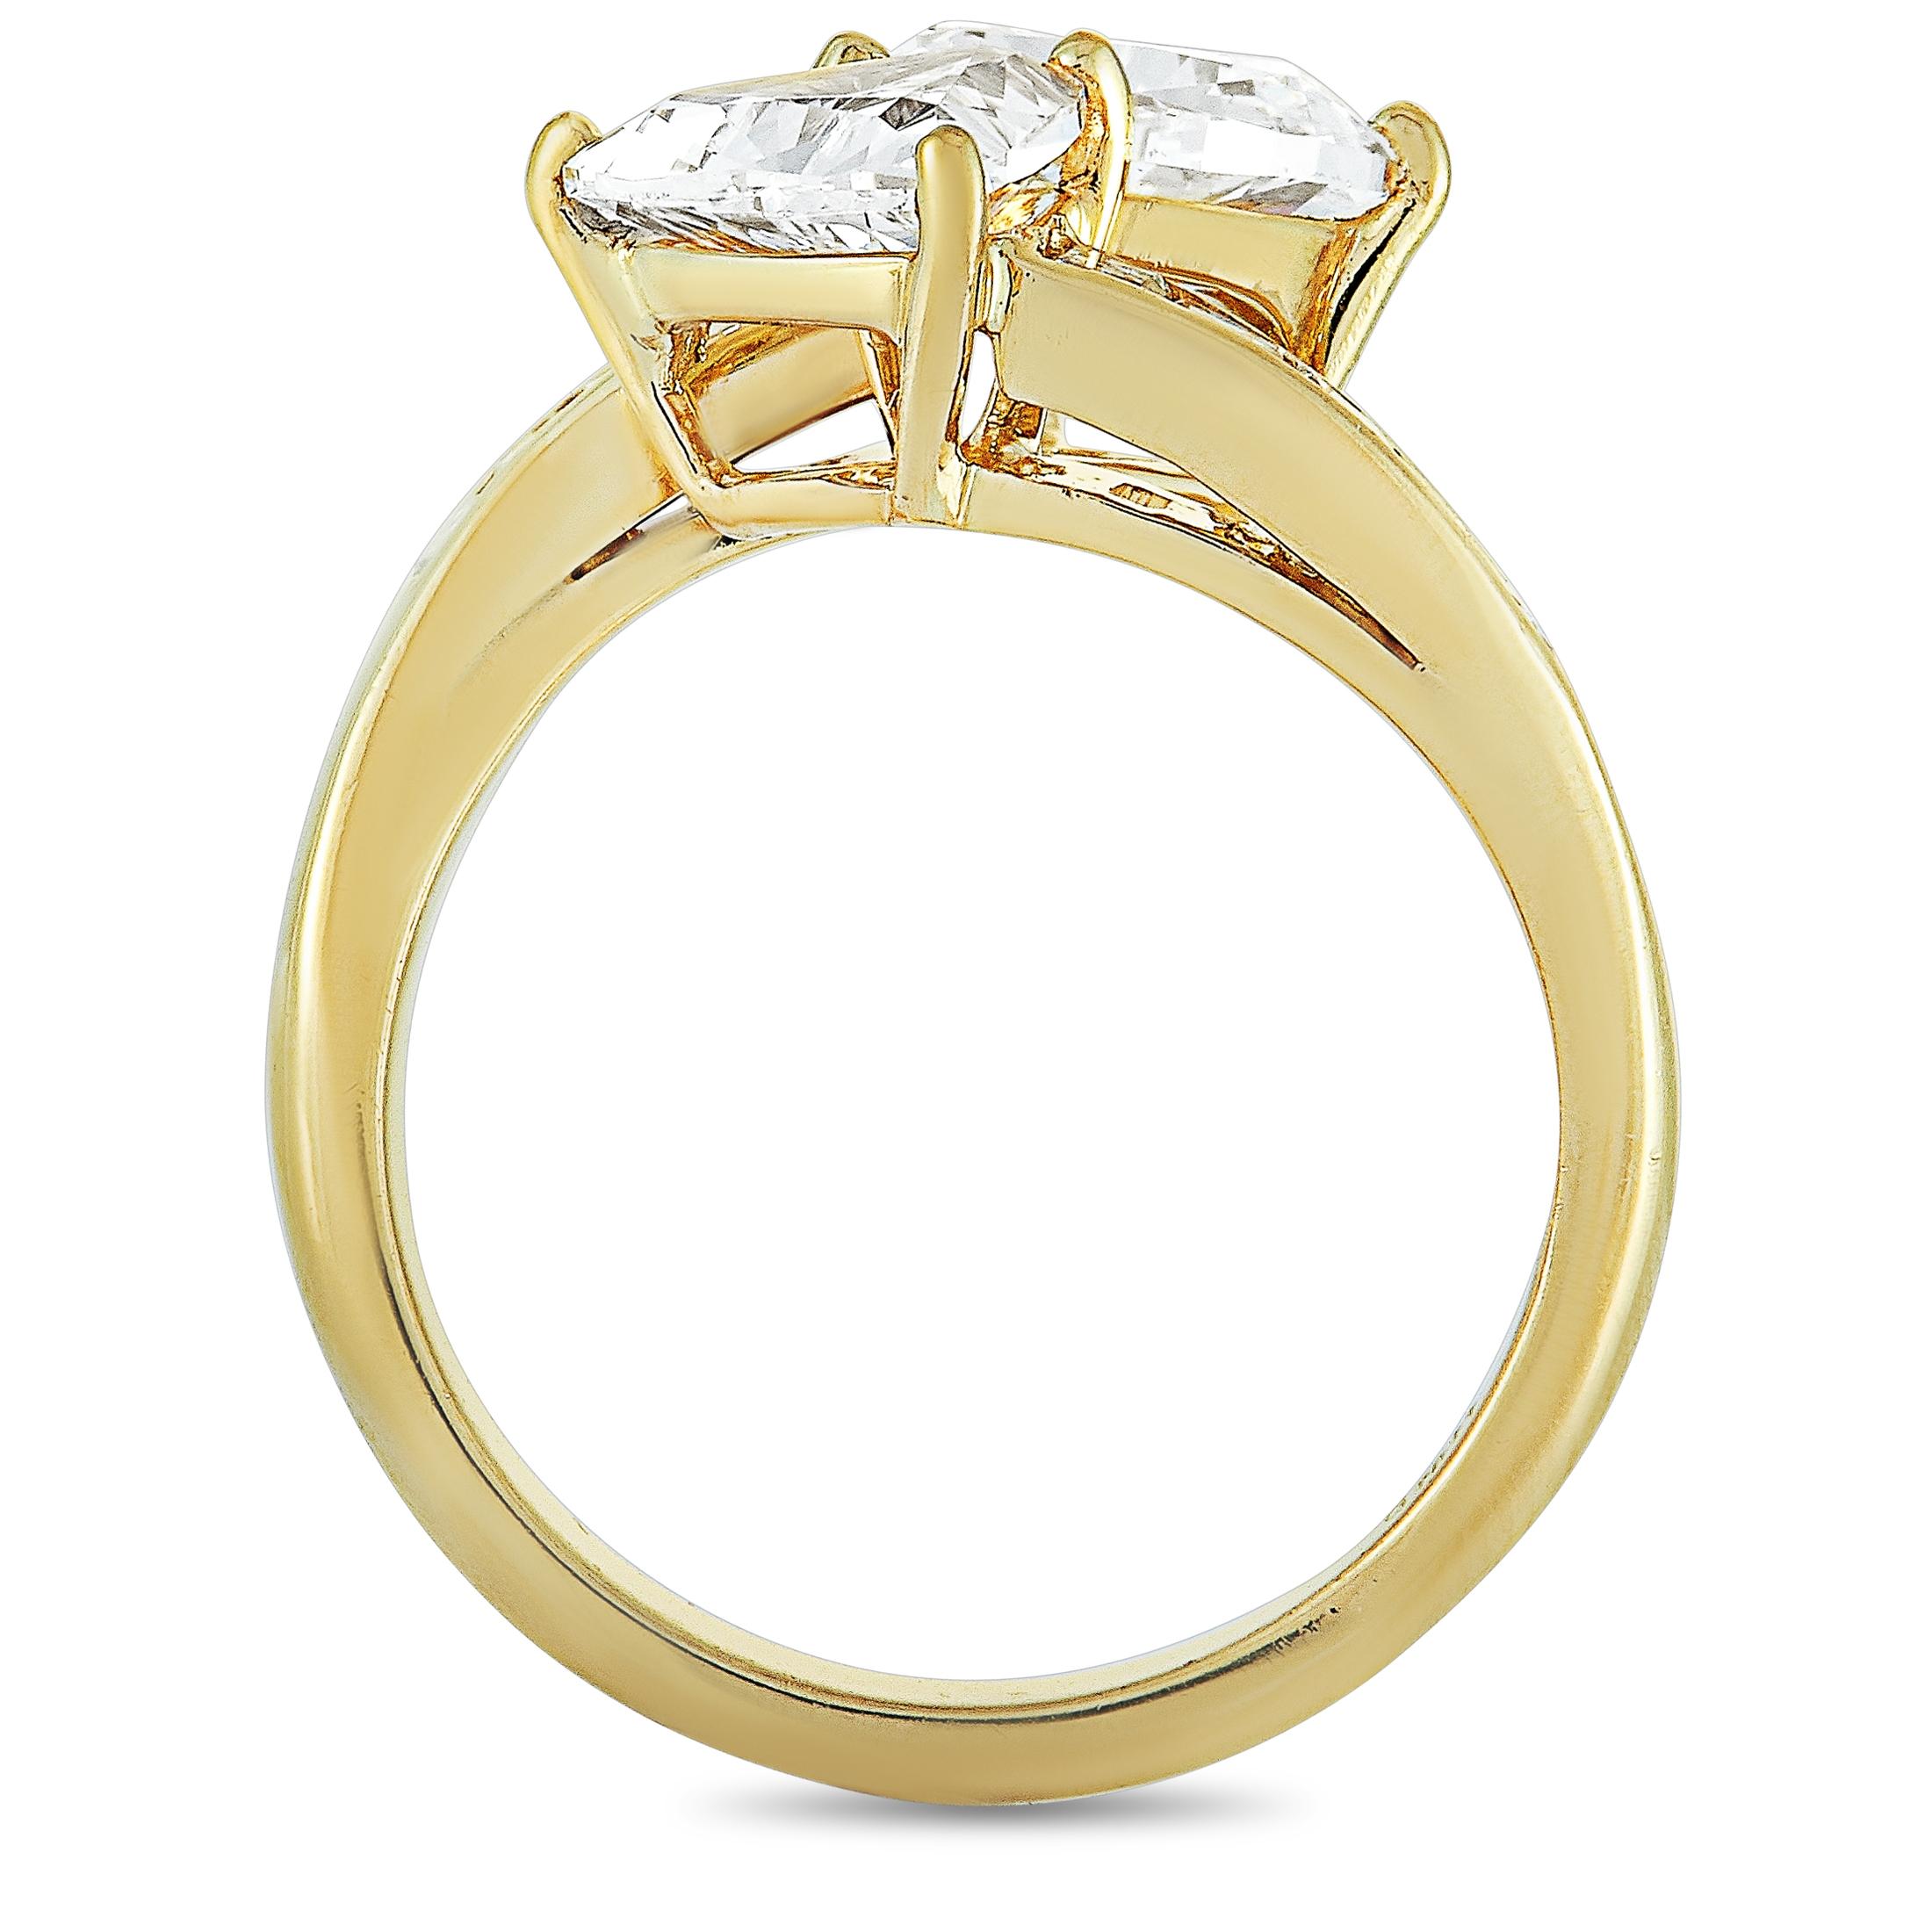 This Graff ring is made of 18K yellow gold and weighs 7.2 grams. It boasts band thickness of 3 mm and top height of 7 mm, while top dimensions measure 17 by 17 mm.
 
The ring is set with a total of approximately 3.10 carats of diamonds, with the